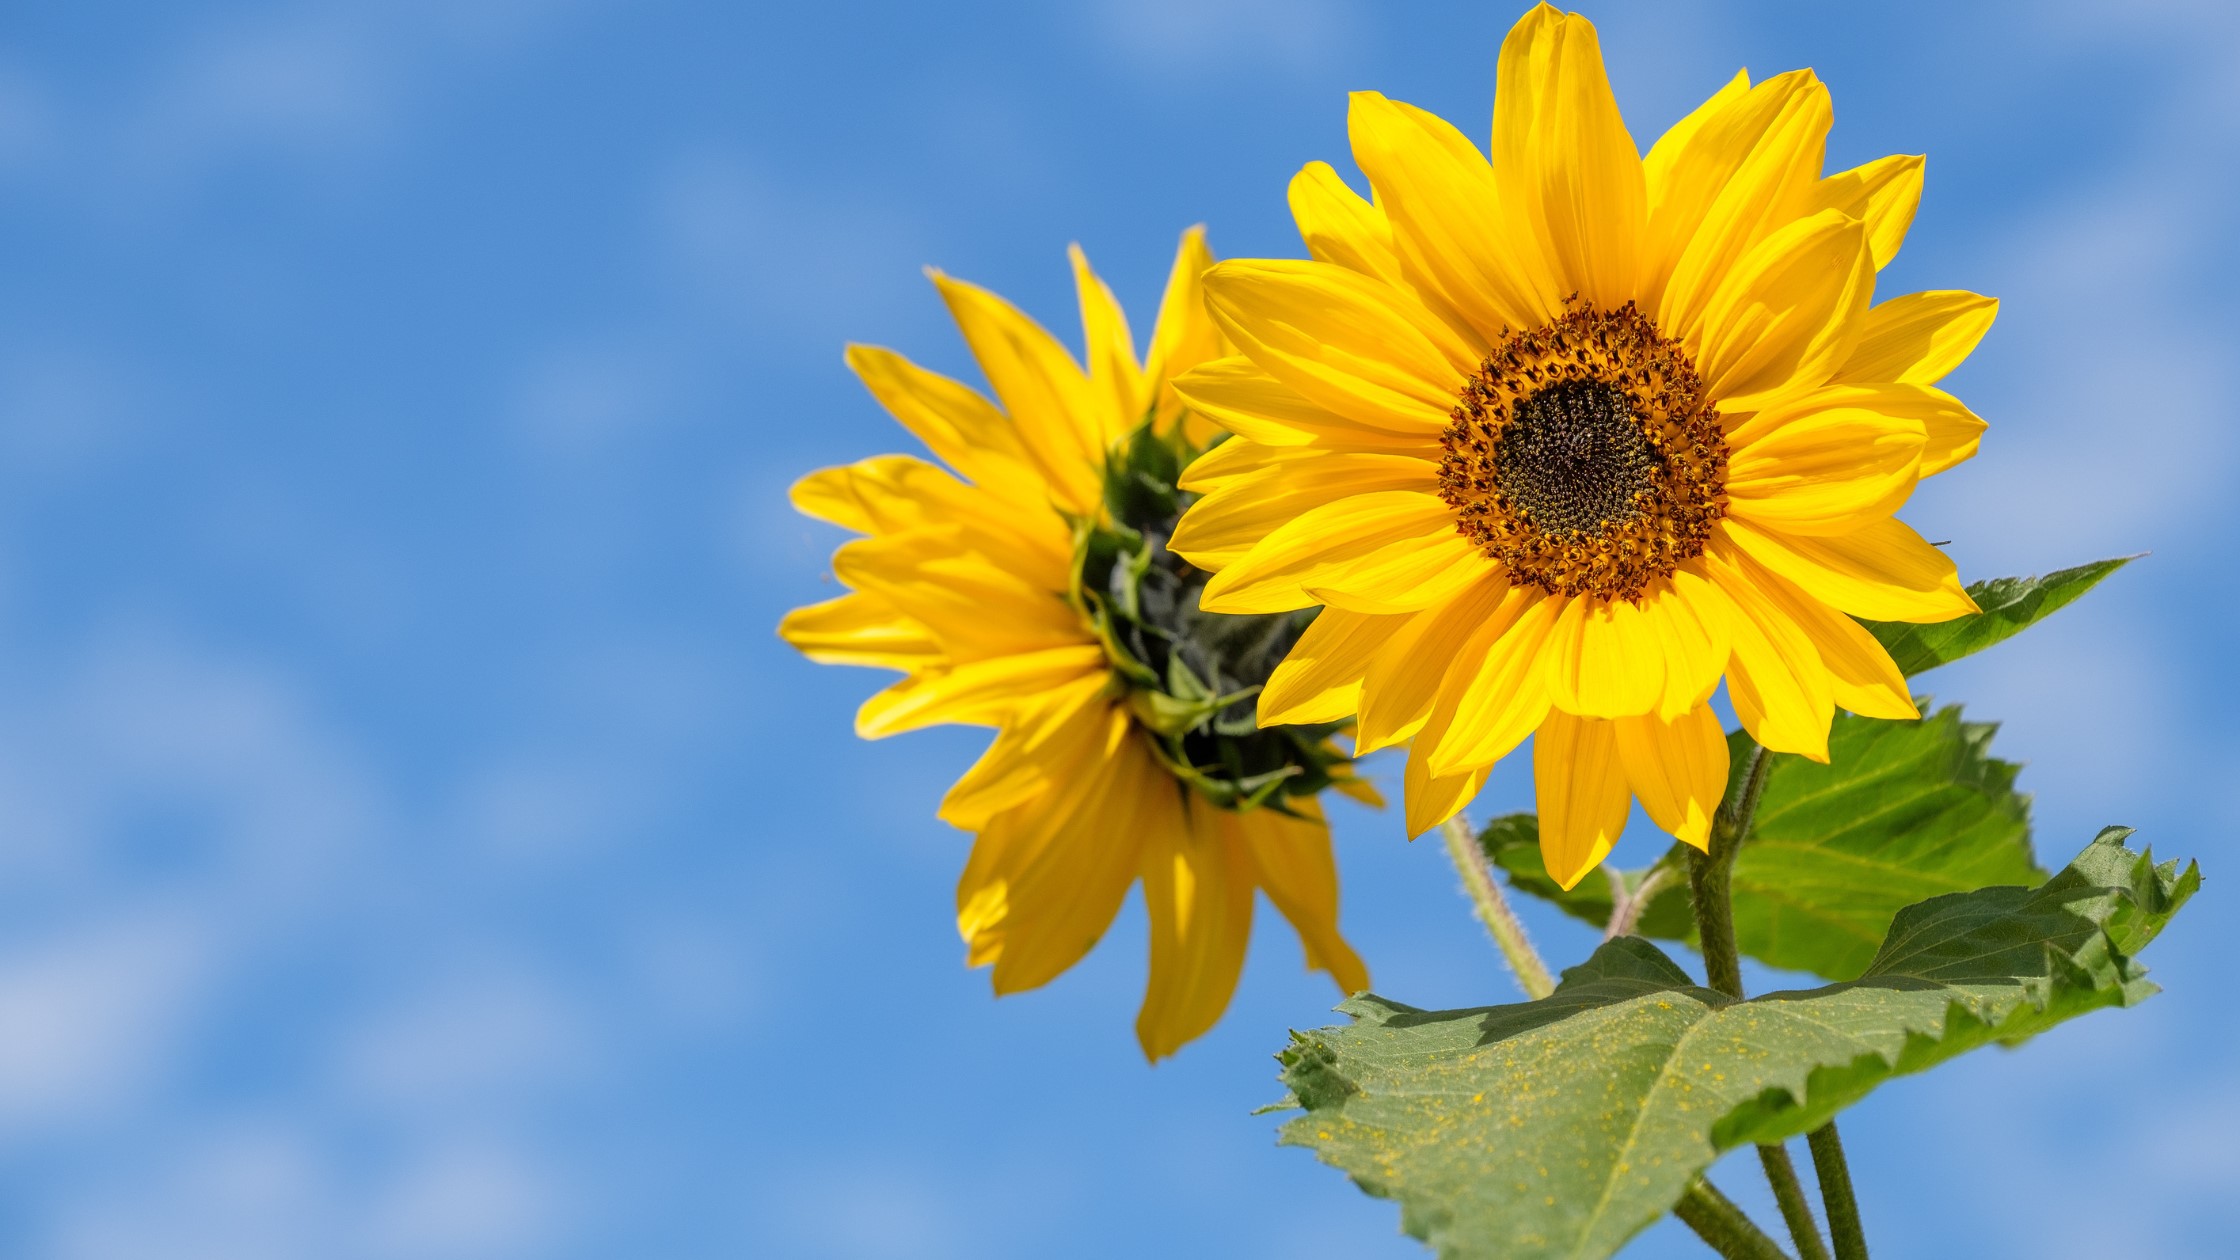 Two large sunflowers against a bright blue sky